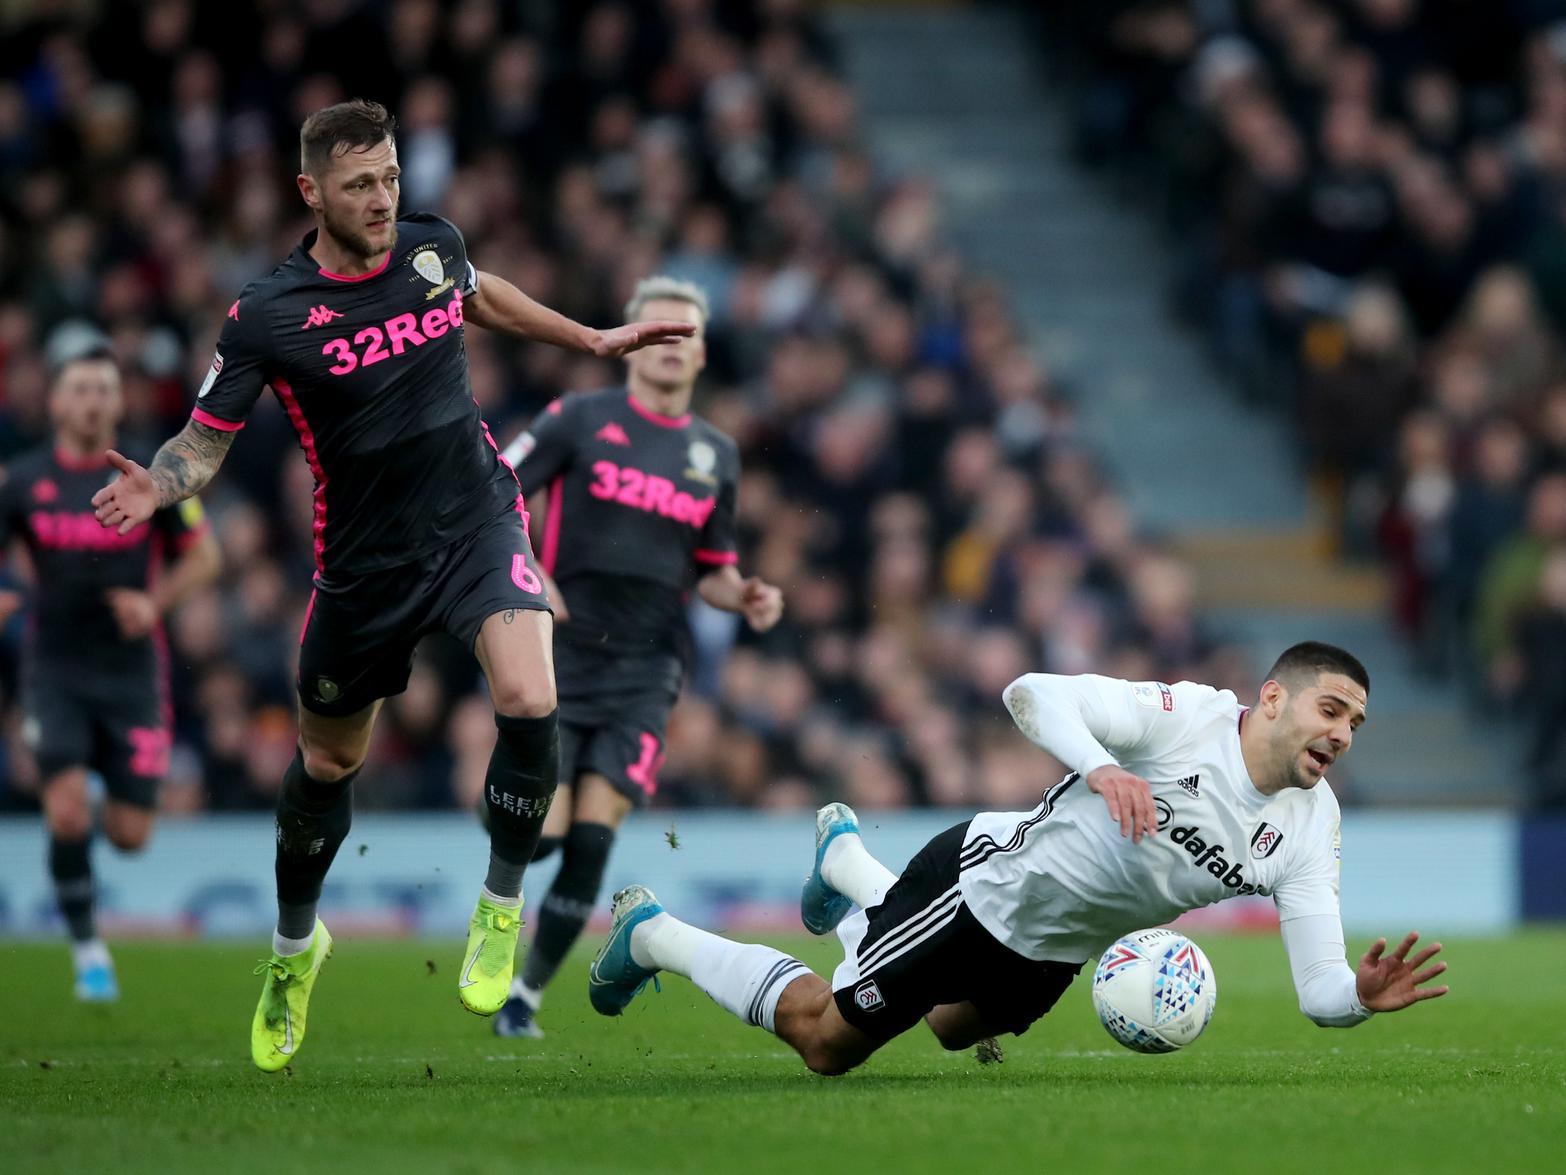 Sky Sports pundit Andy Hinchcliffe ripped into Leeds captain Liam Cooper during their 1-1 draw with Preston, arguing that the Scotsman's response when put under pressure wasn't good enough. (Sky Sports)